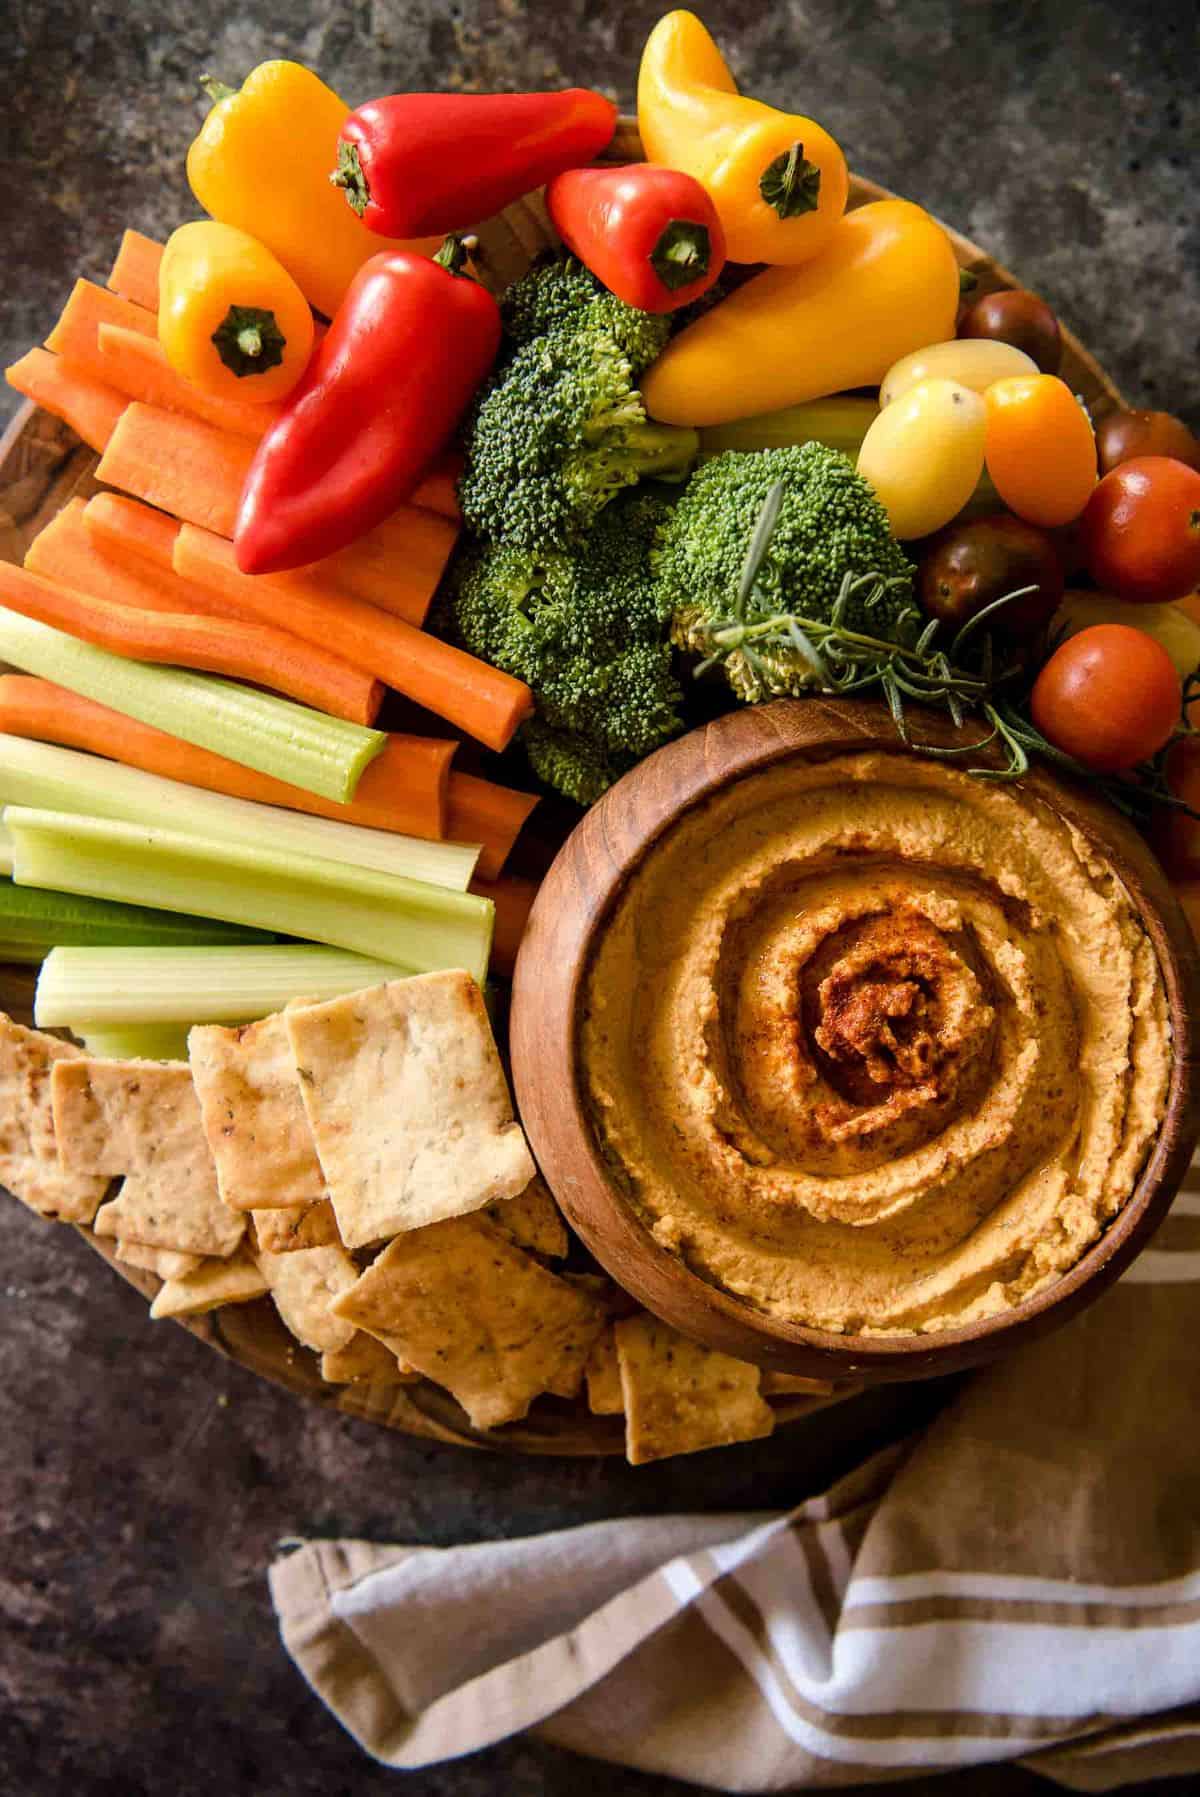 Everything you love about your favorite hummus with a little bit of fall added in - this savory Roasted Garlic Pumpkin Hummus takes just 5 minutes to make, and will please every palate!